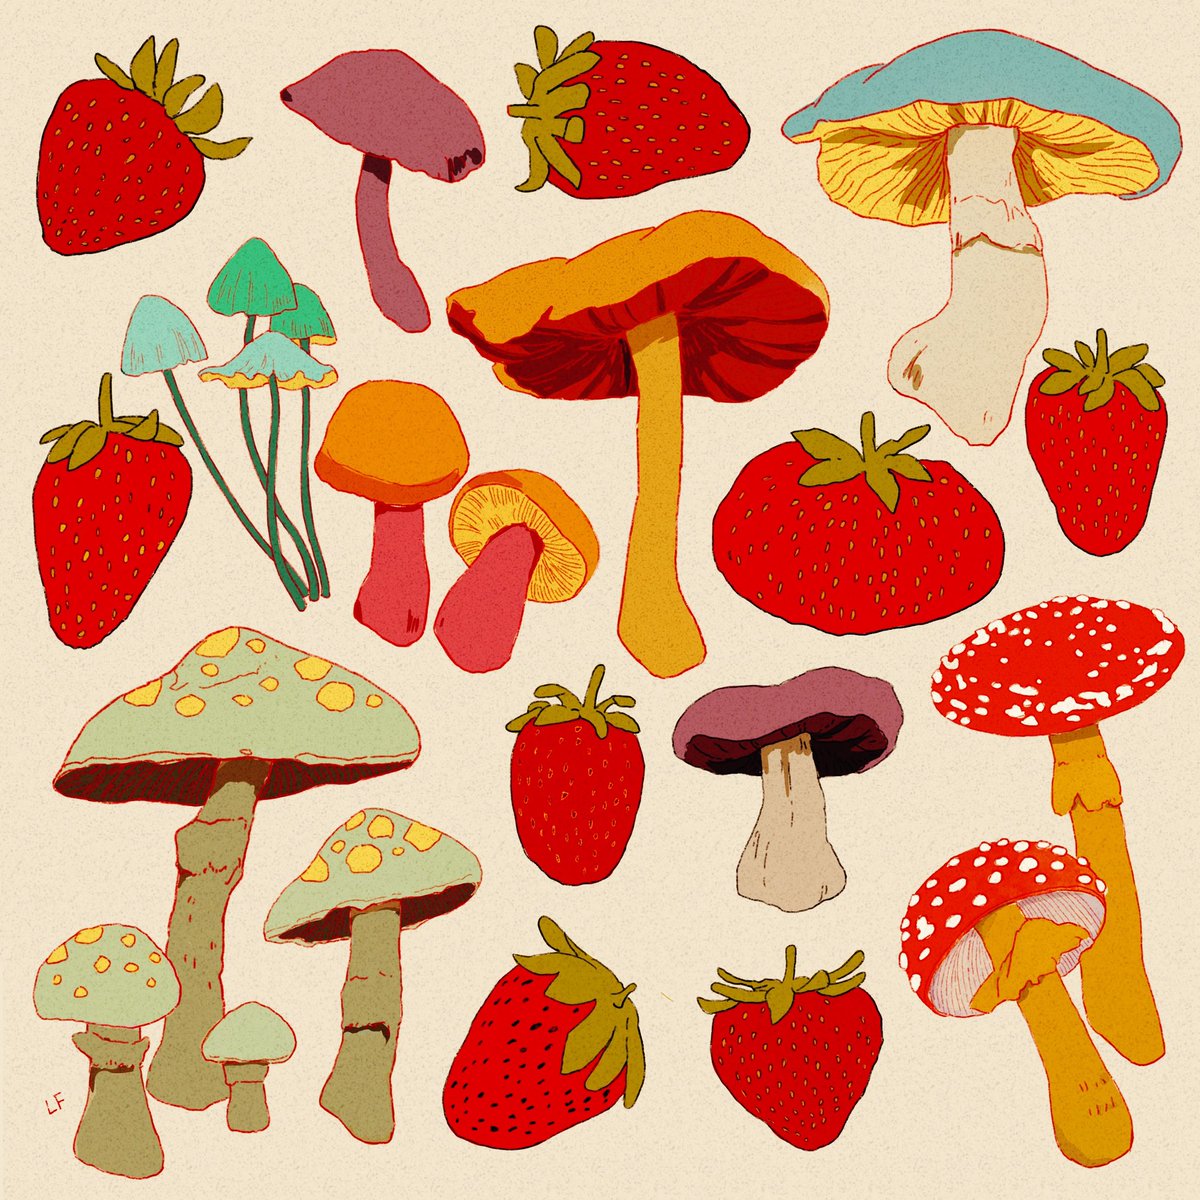 「🍄🍓 」|Libbyのイラスト